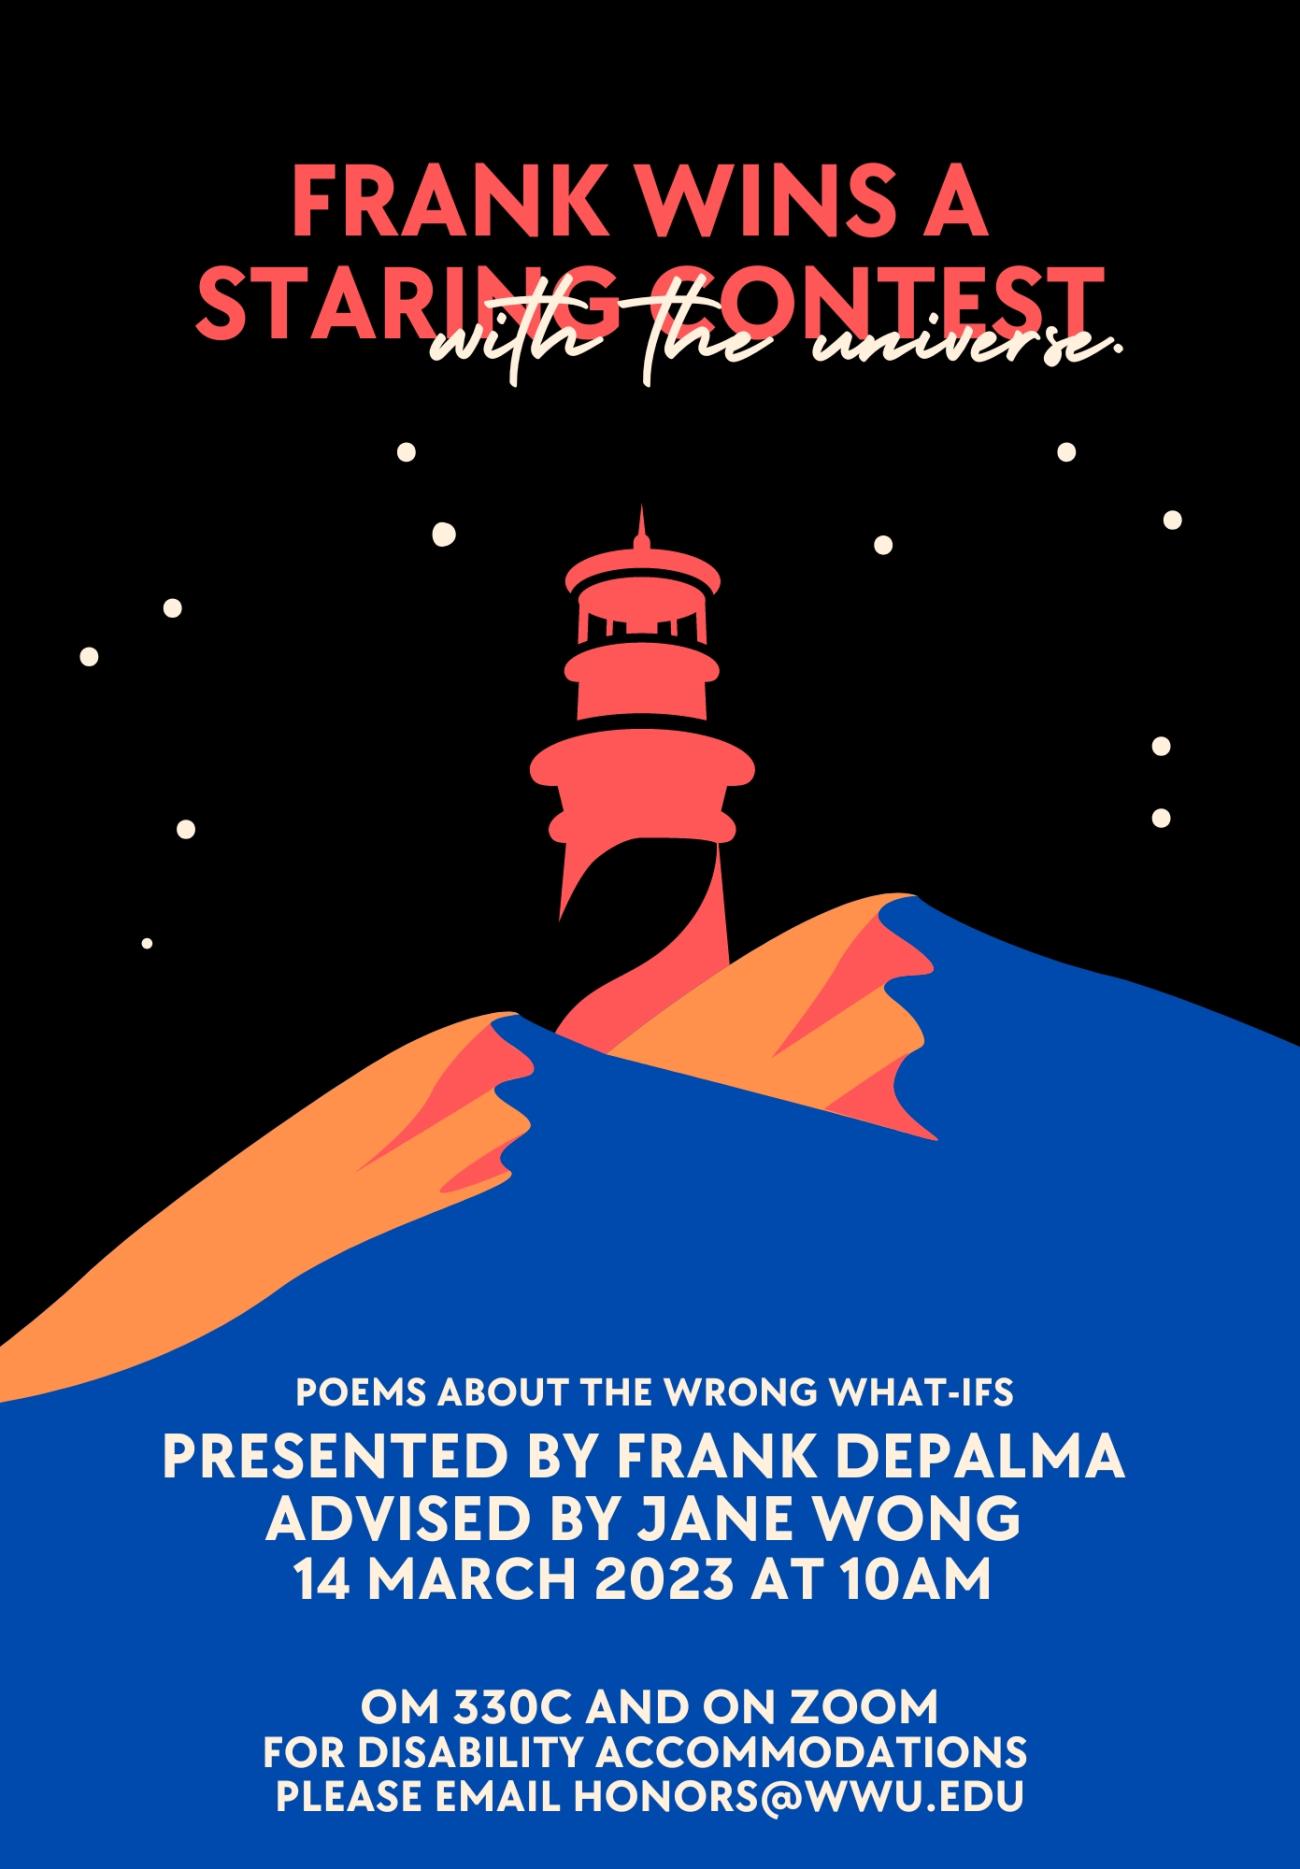 Black, starry night sky over a minimalistic illustration of blue and orange desert dunes with a bright red stylized lighthouse at the center. Text reads “Frank Wins a Staring Contest with the Universe: Poems about the Wrong What-Ifs. Presented by Frank DePalma, Advised by Jane Wong. 14 March 2023 at 10am, Old Main 330C and on Zoom. For disabilty accommodations please contact honors@wwu.edu."